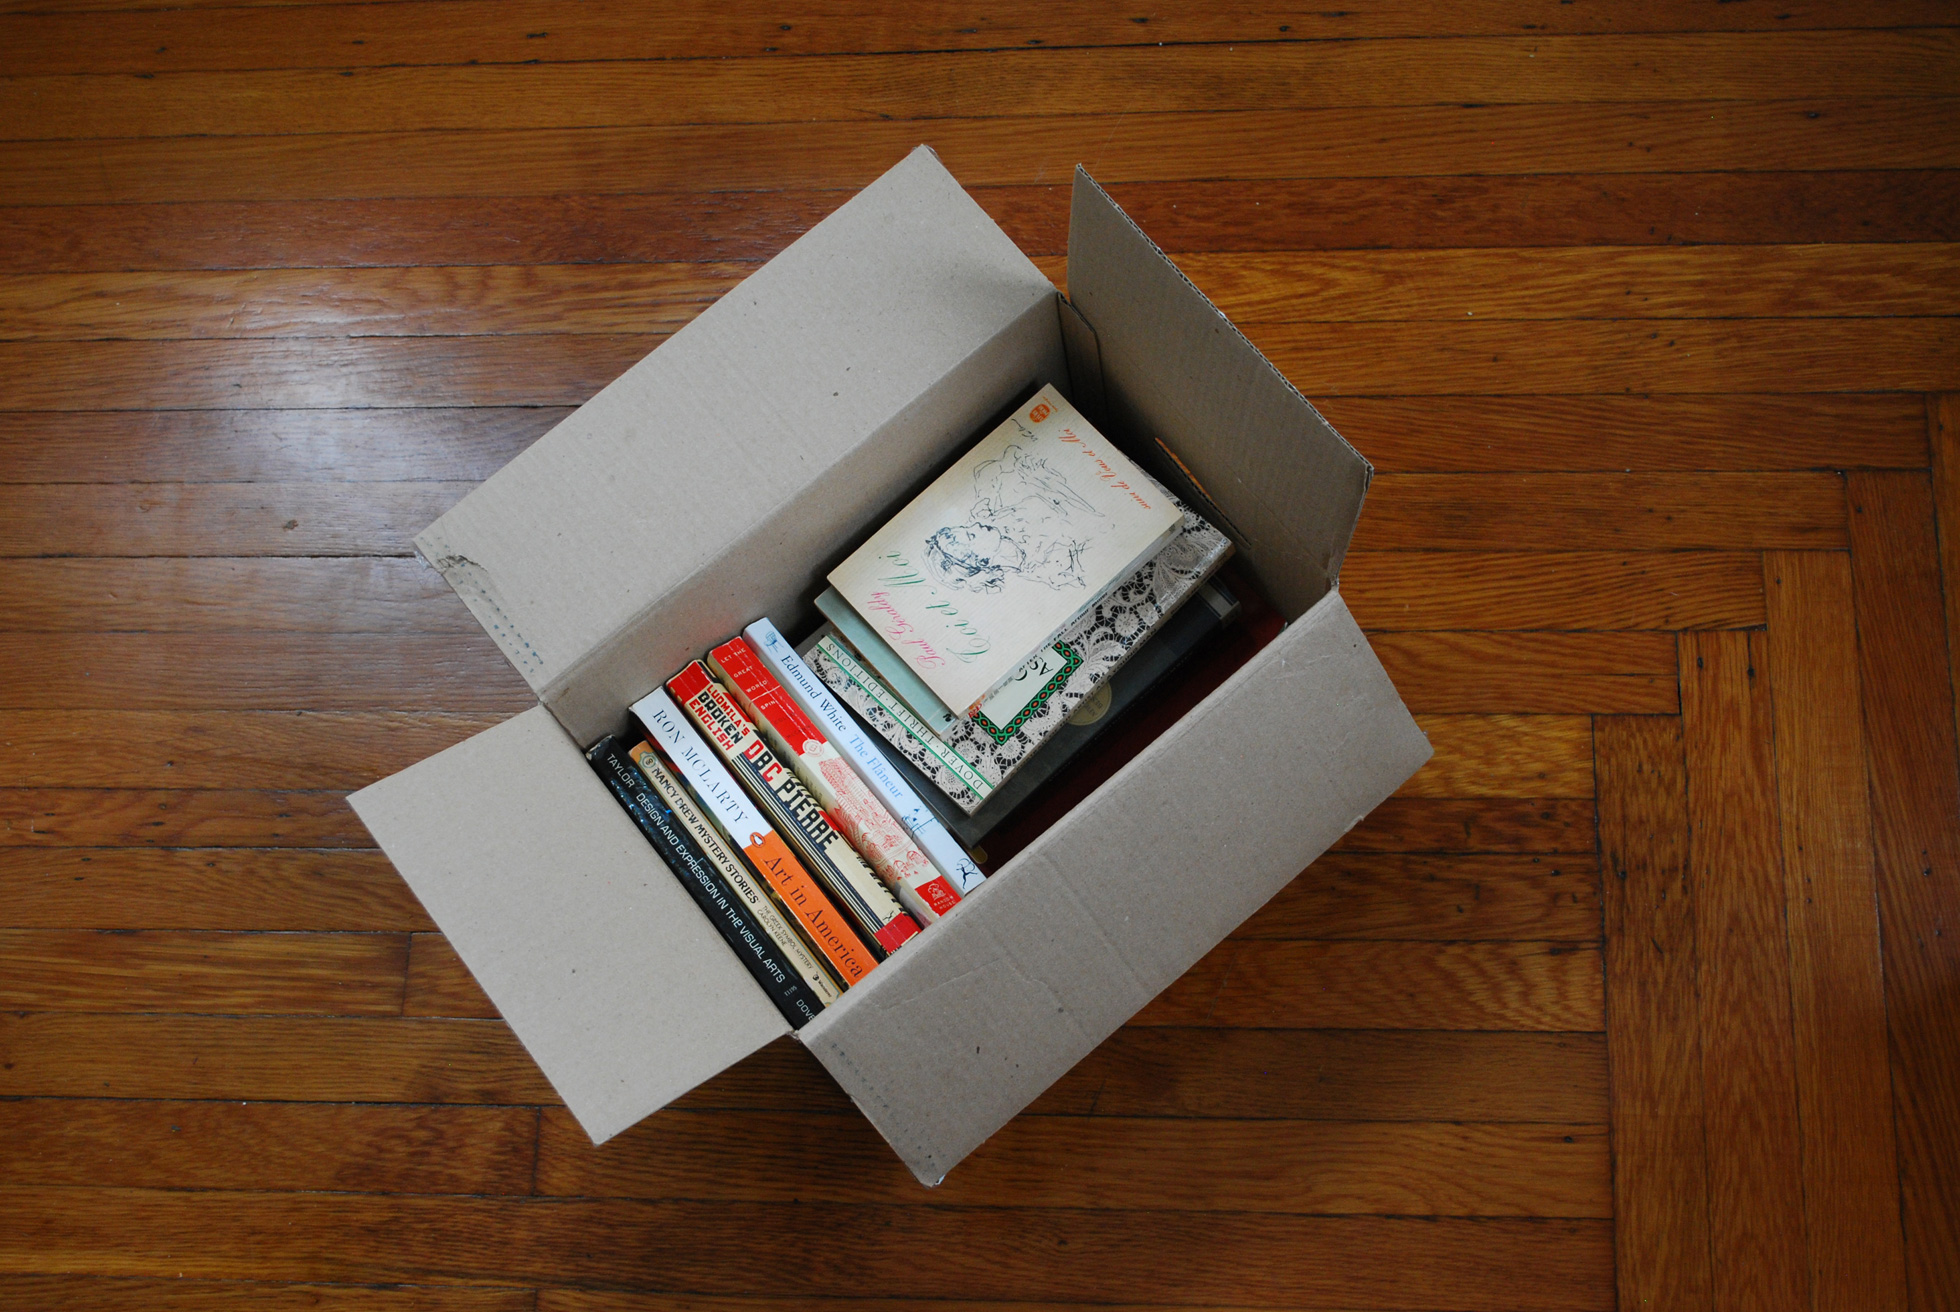 Books packed in a moving box